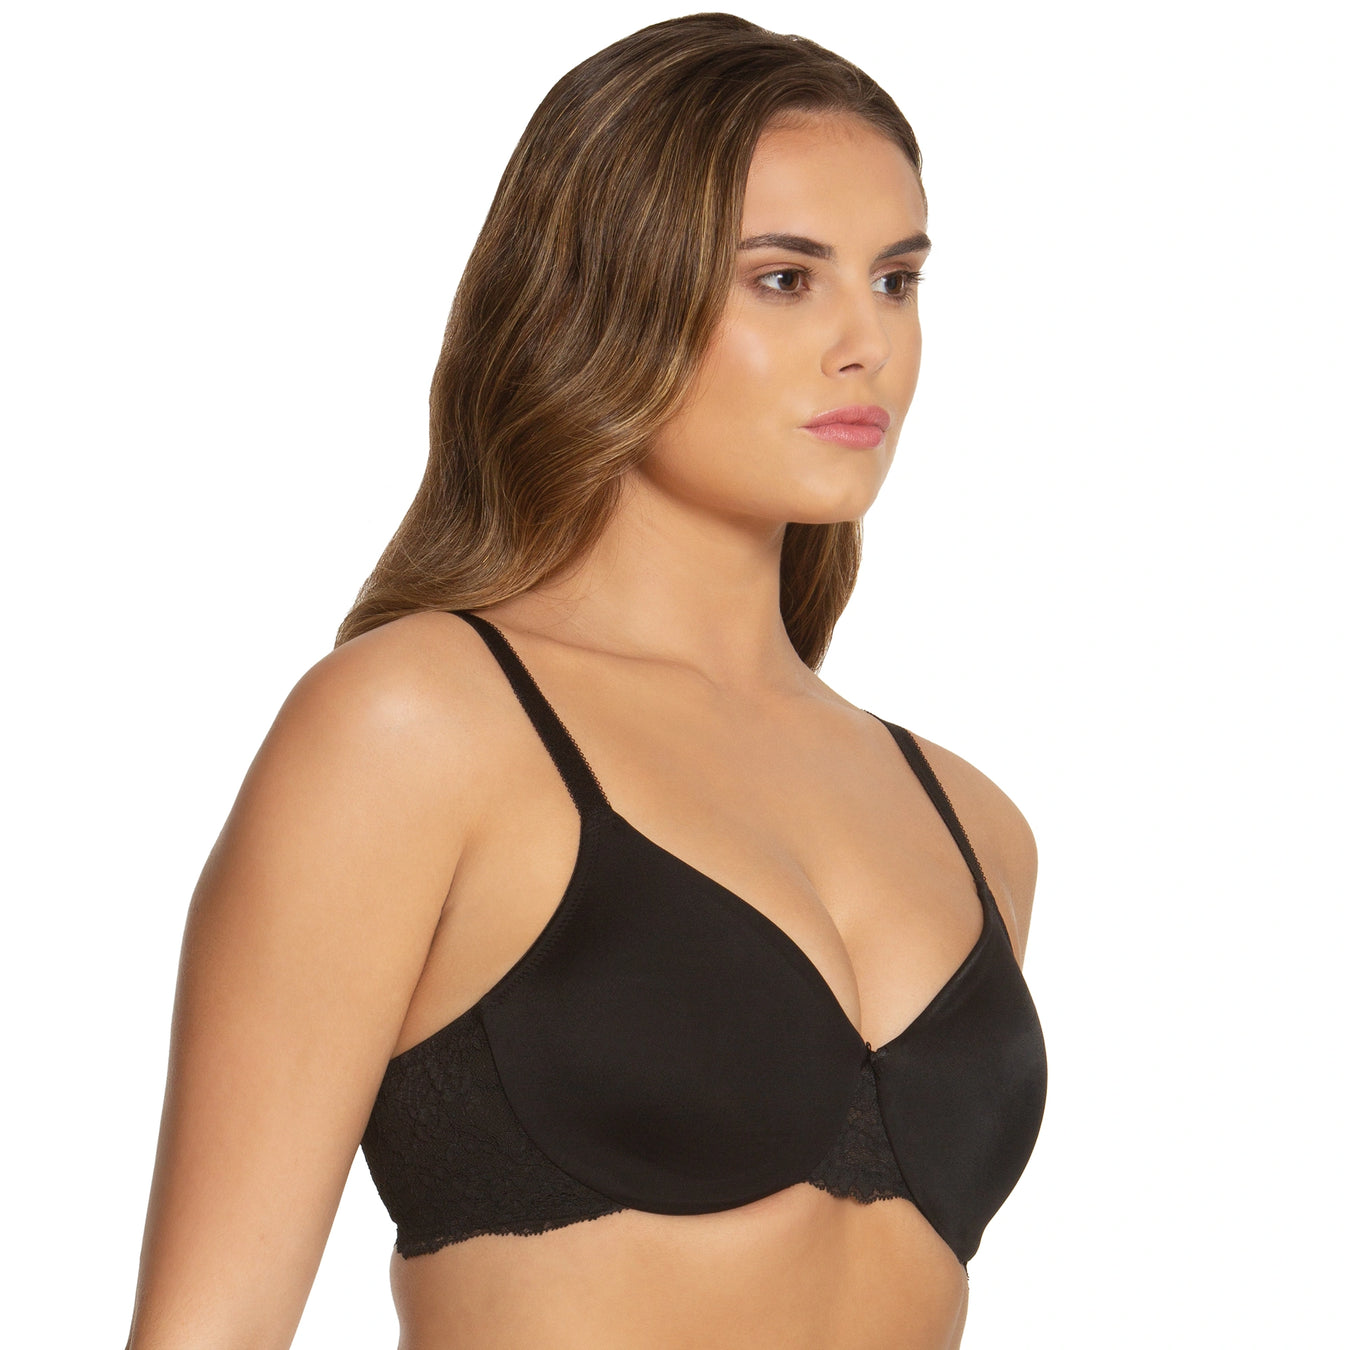 LAVINIA BRAS - Find Your Perfect Fit, 100-Day Returns